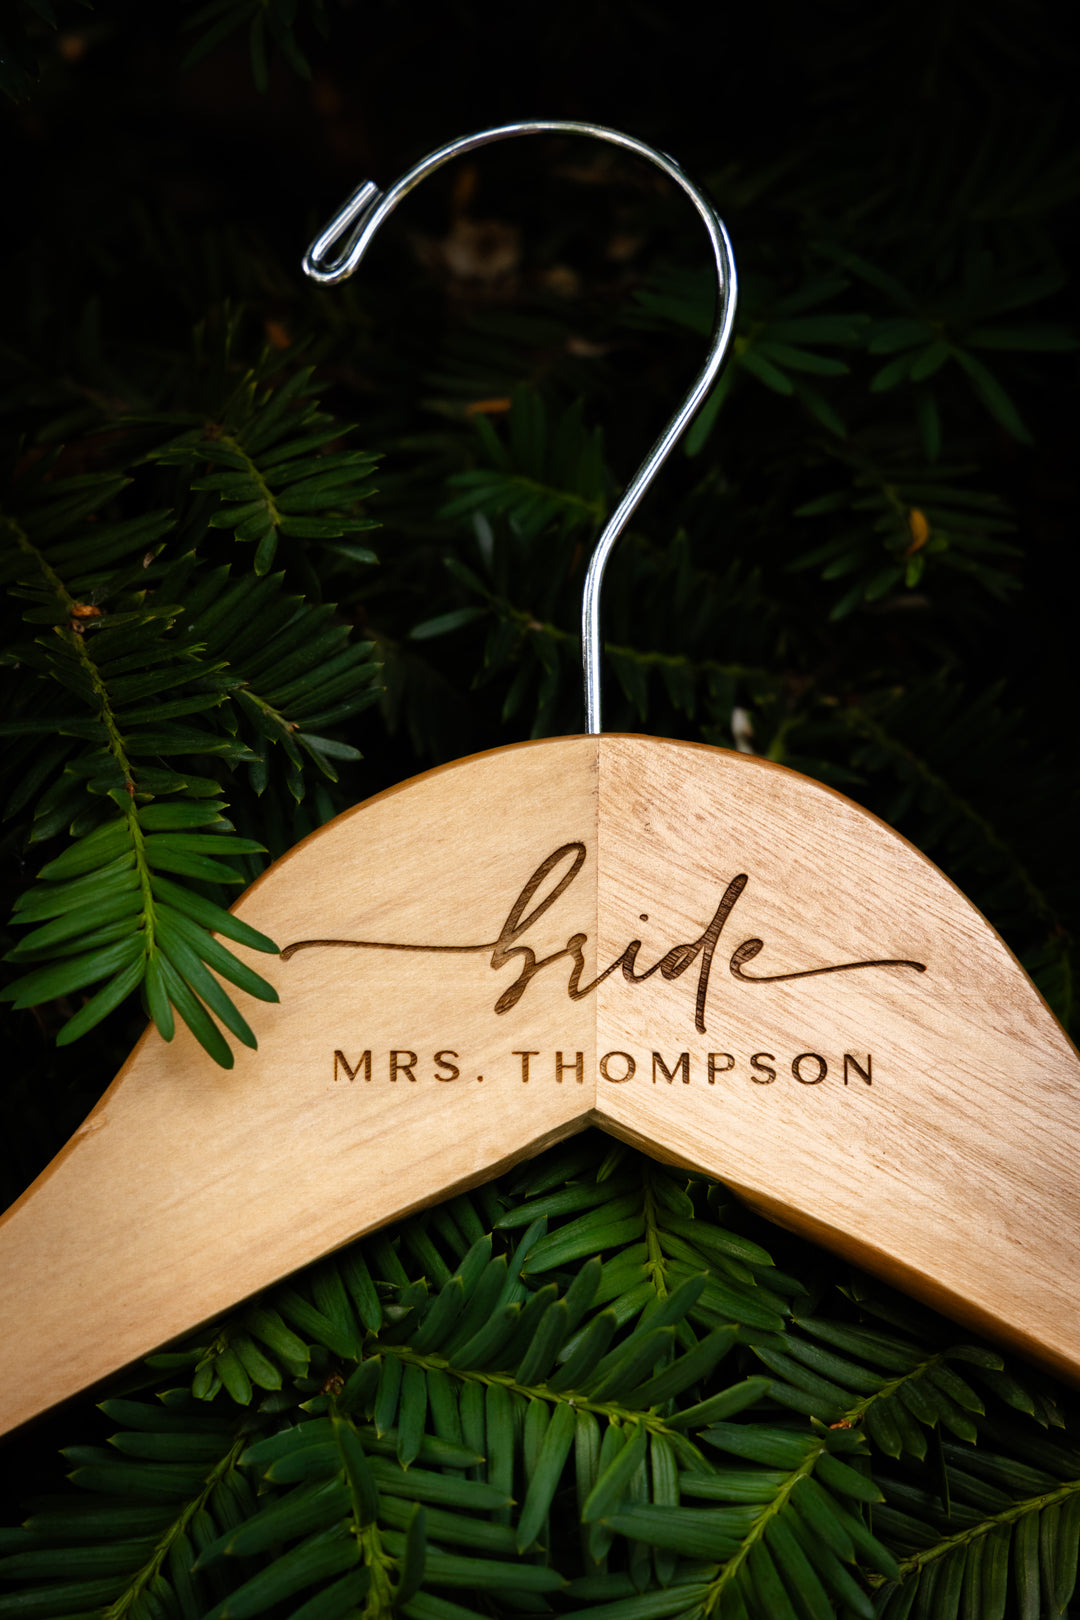 Personalized Engraved Wedding Dress Hangers for Bridal Party. Hanger Swashes